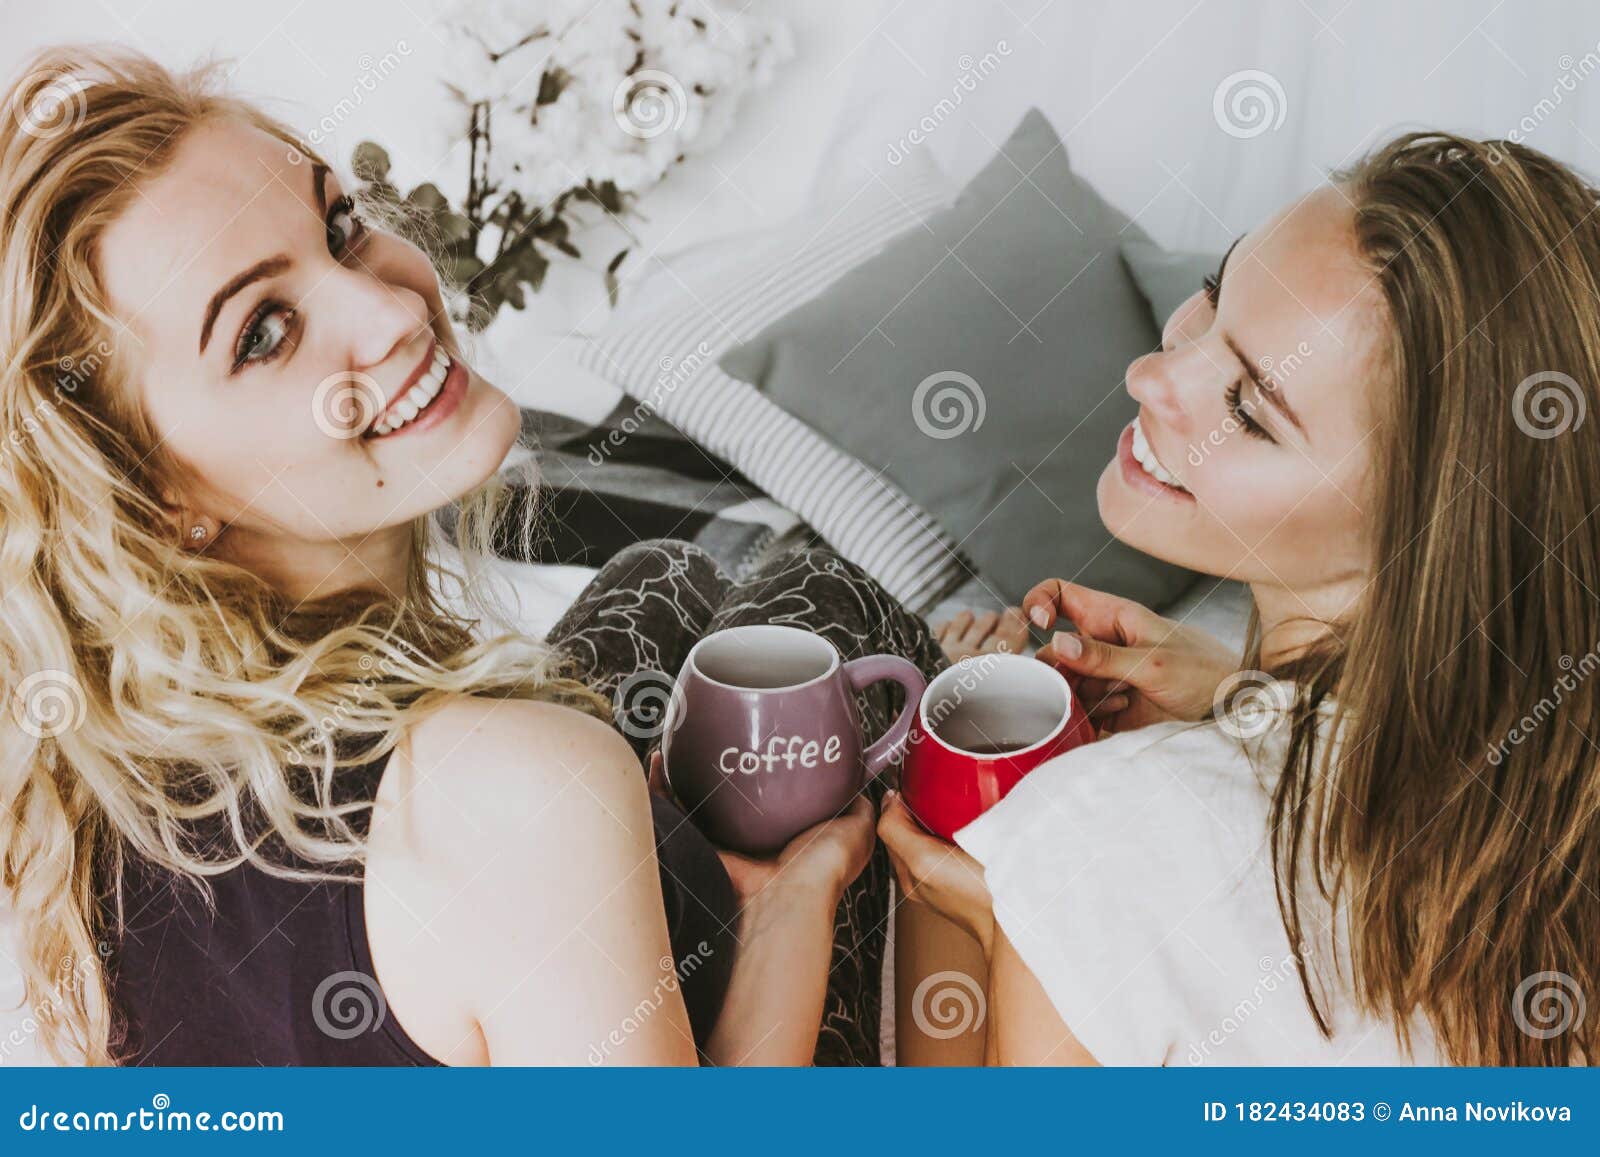 Girls and a cup